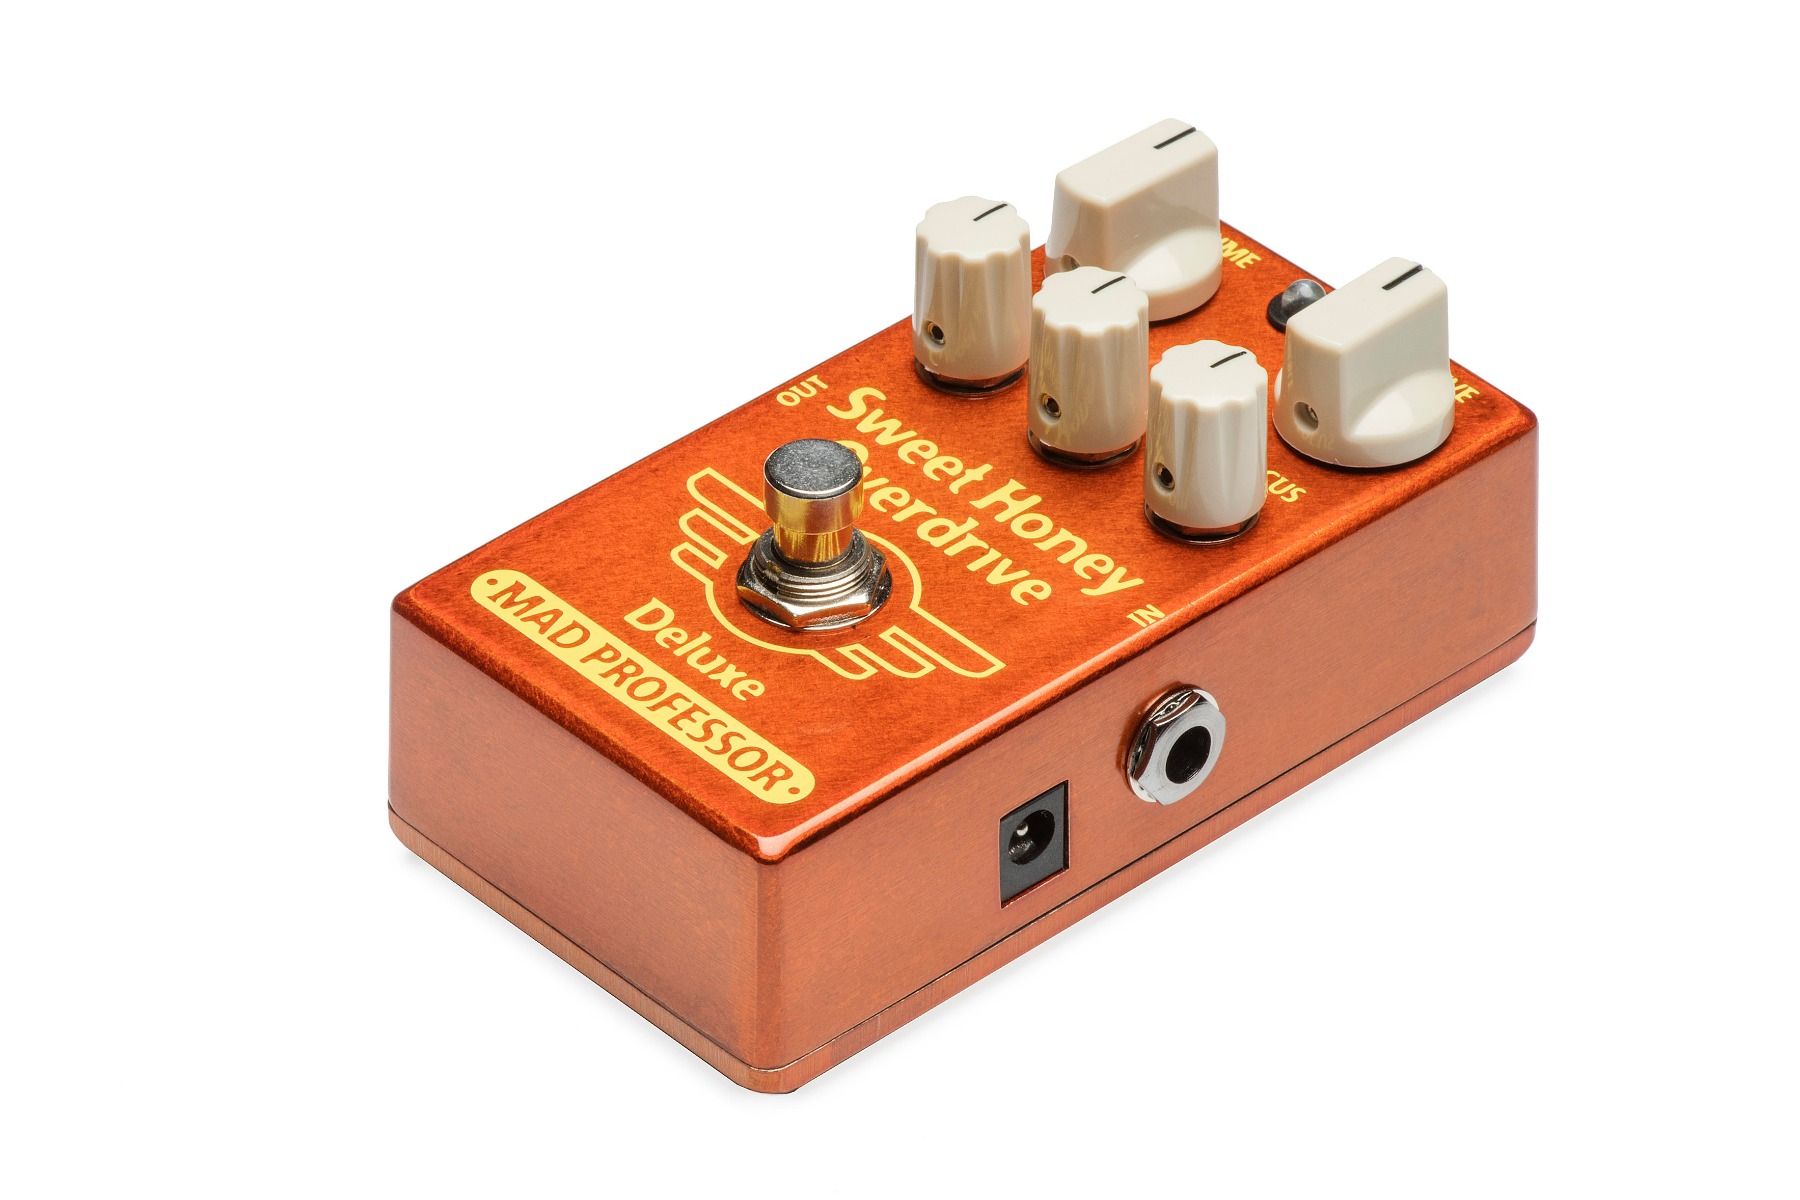 SWEET HONEY OVERDRIVE DELUXE FAC | Mad Professor Amplification